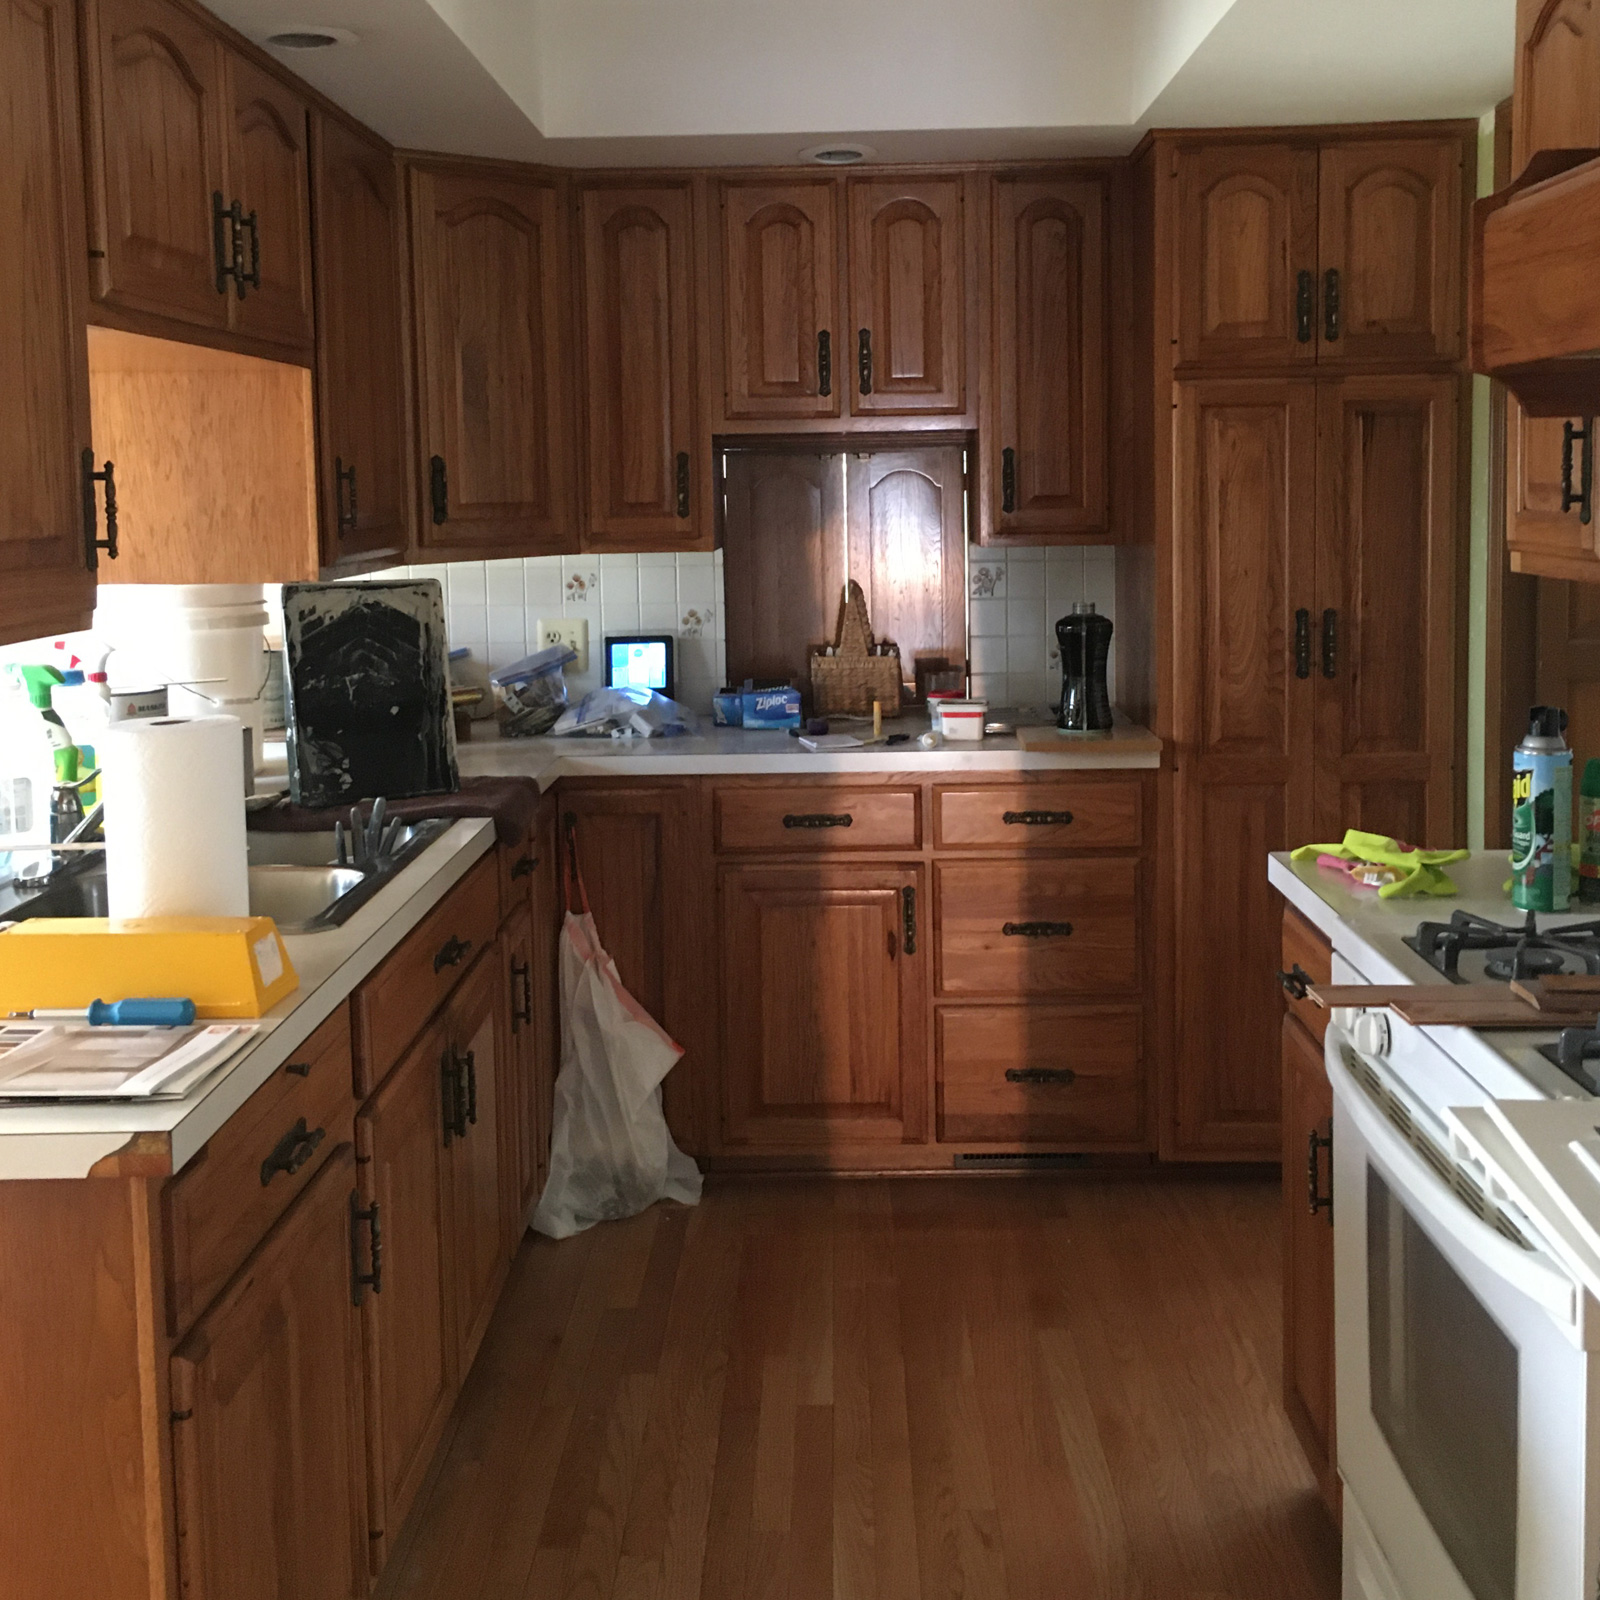 Entry 26 - This kitchen needs spiced up with new cabinets